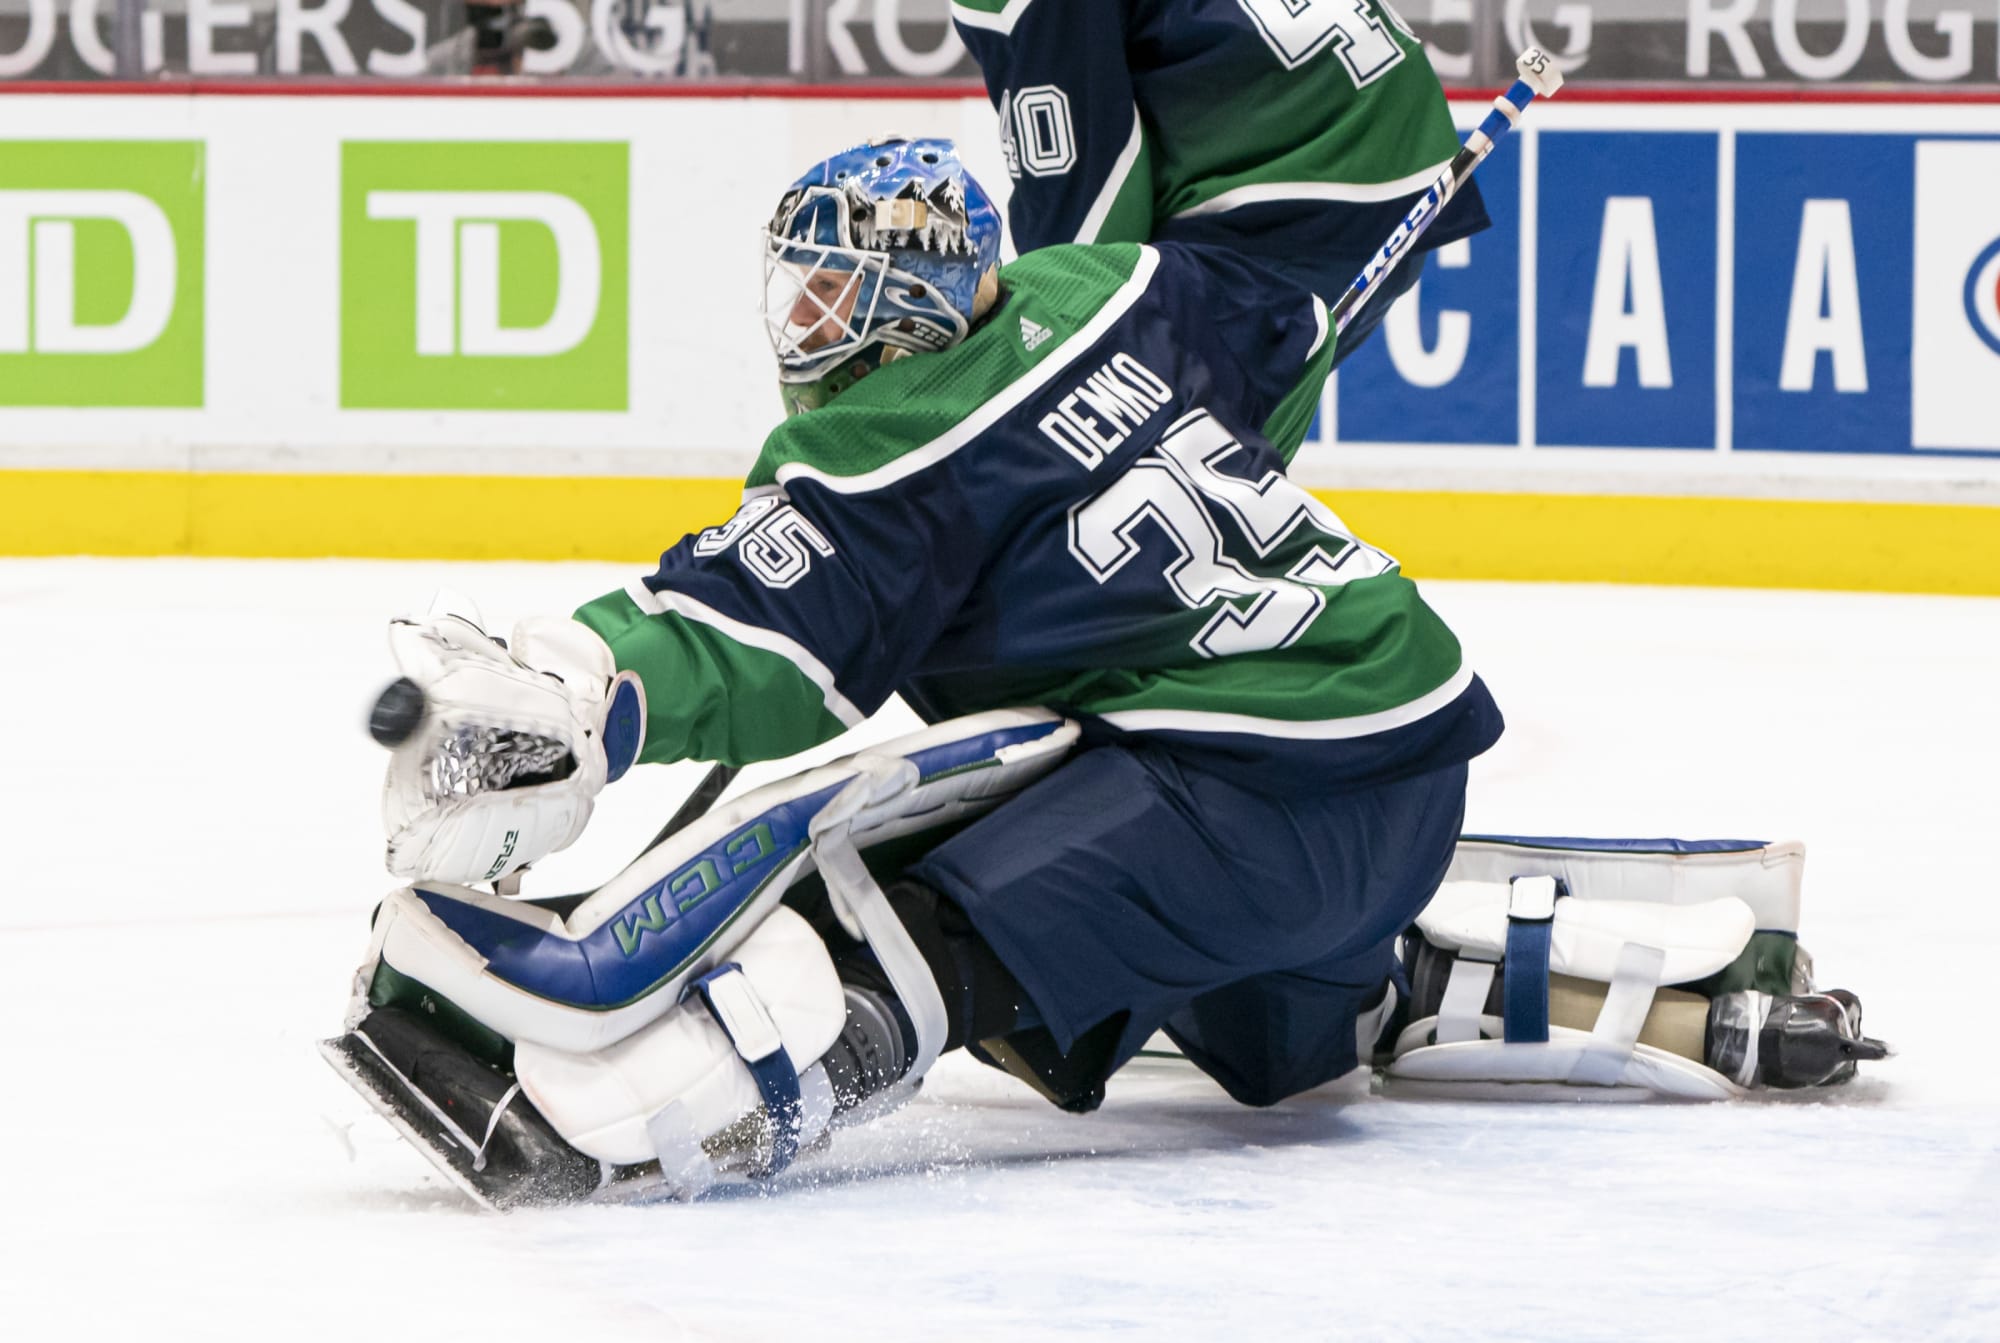 Demko makes 34 saves as Vancouver Canucks storm back for 6-4 win